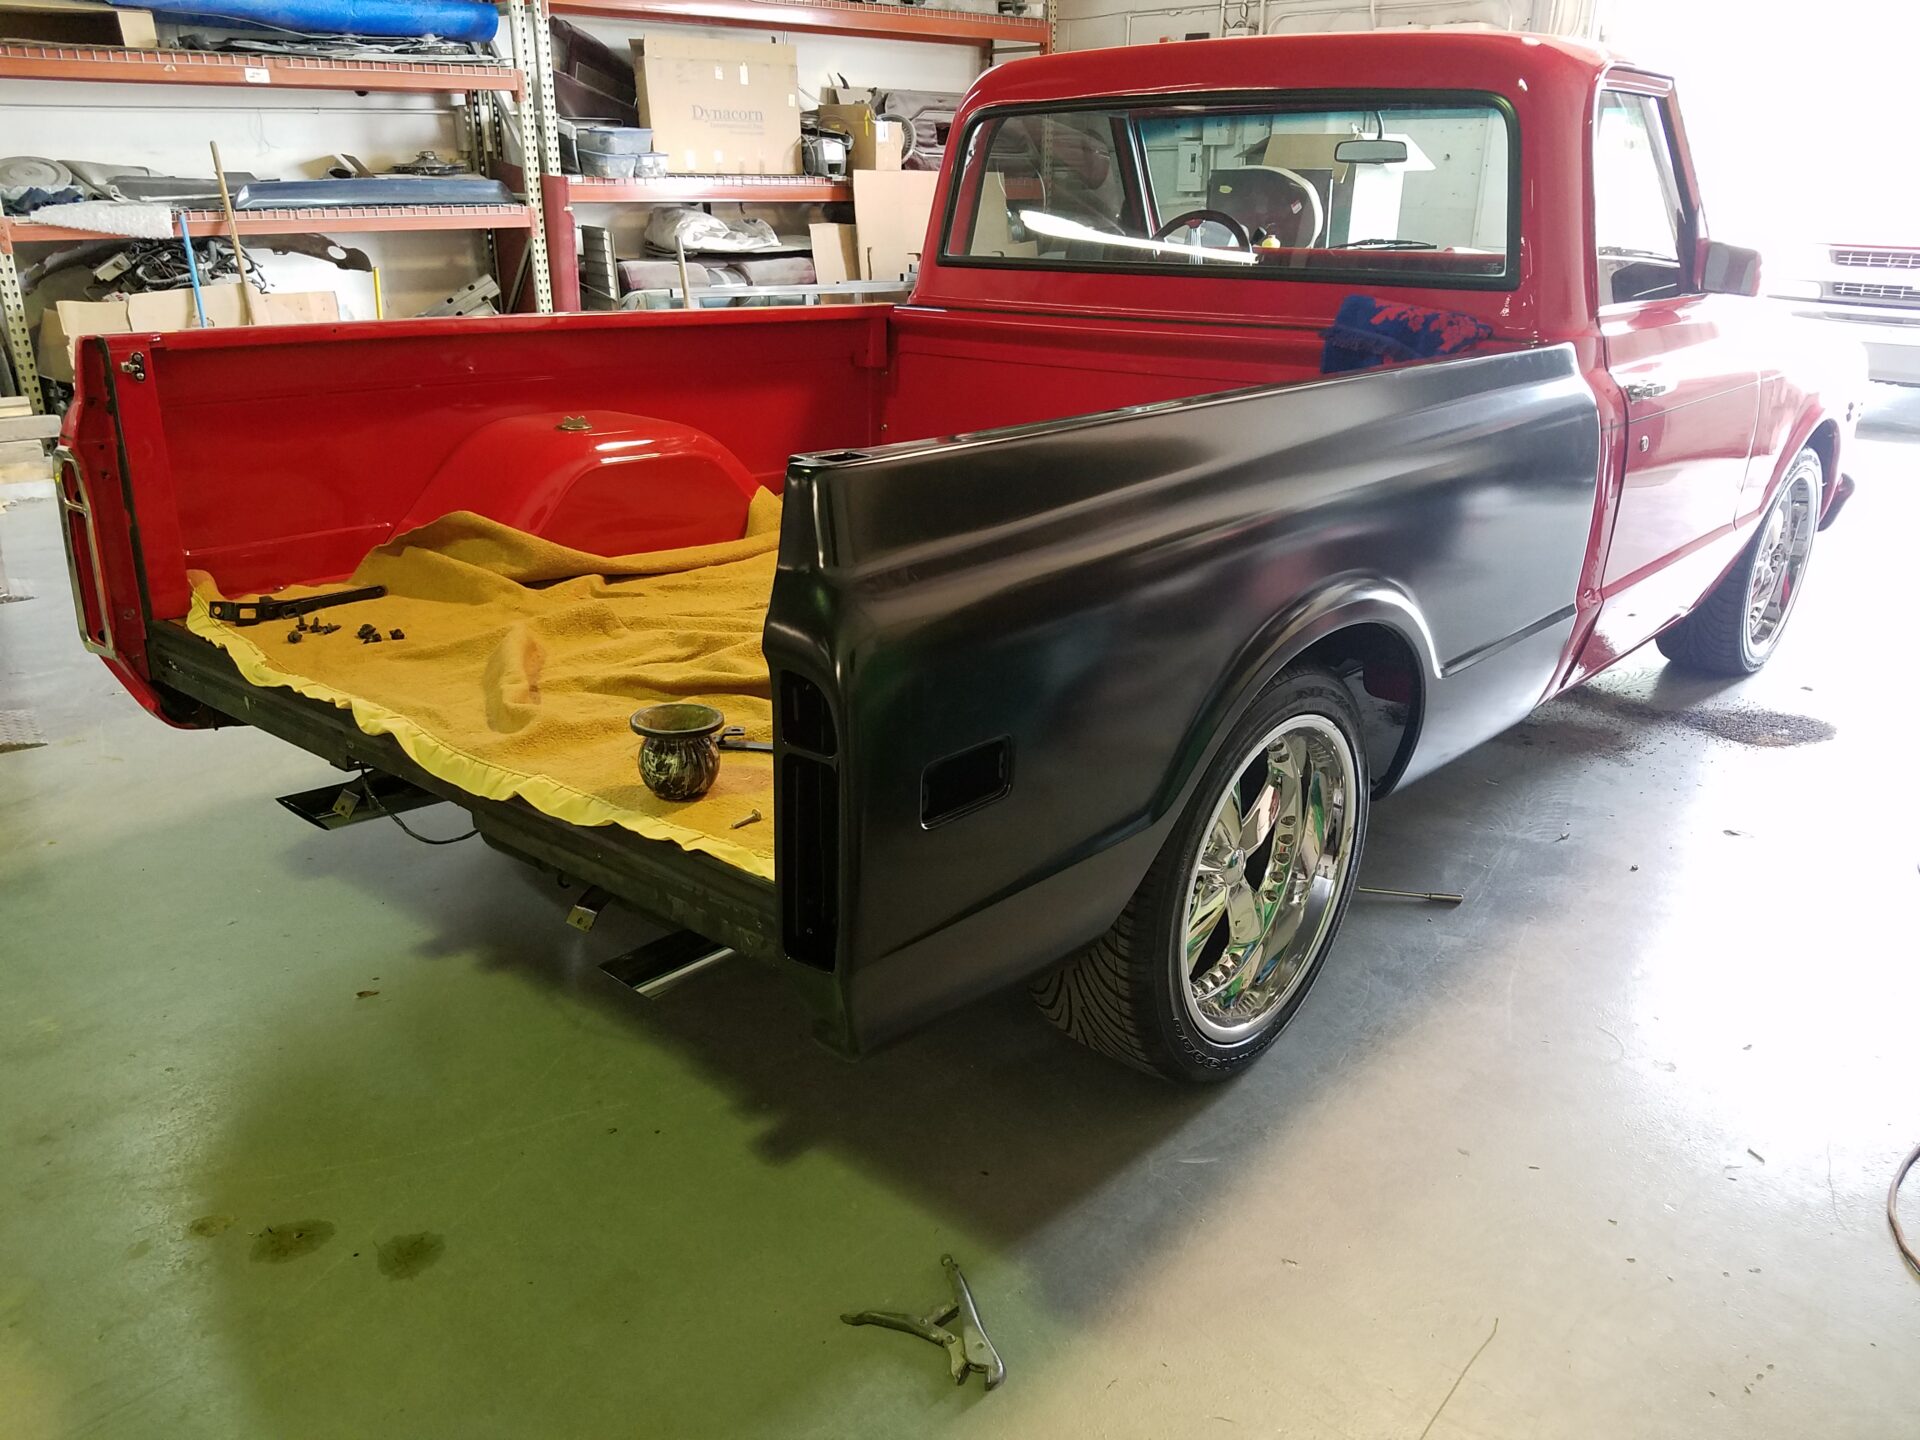 Installed a newly painted 1968 Chevy C10 part